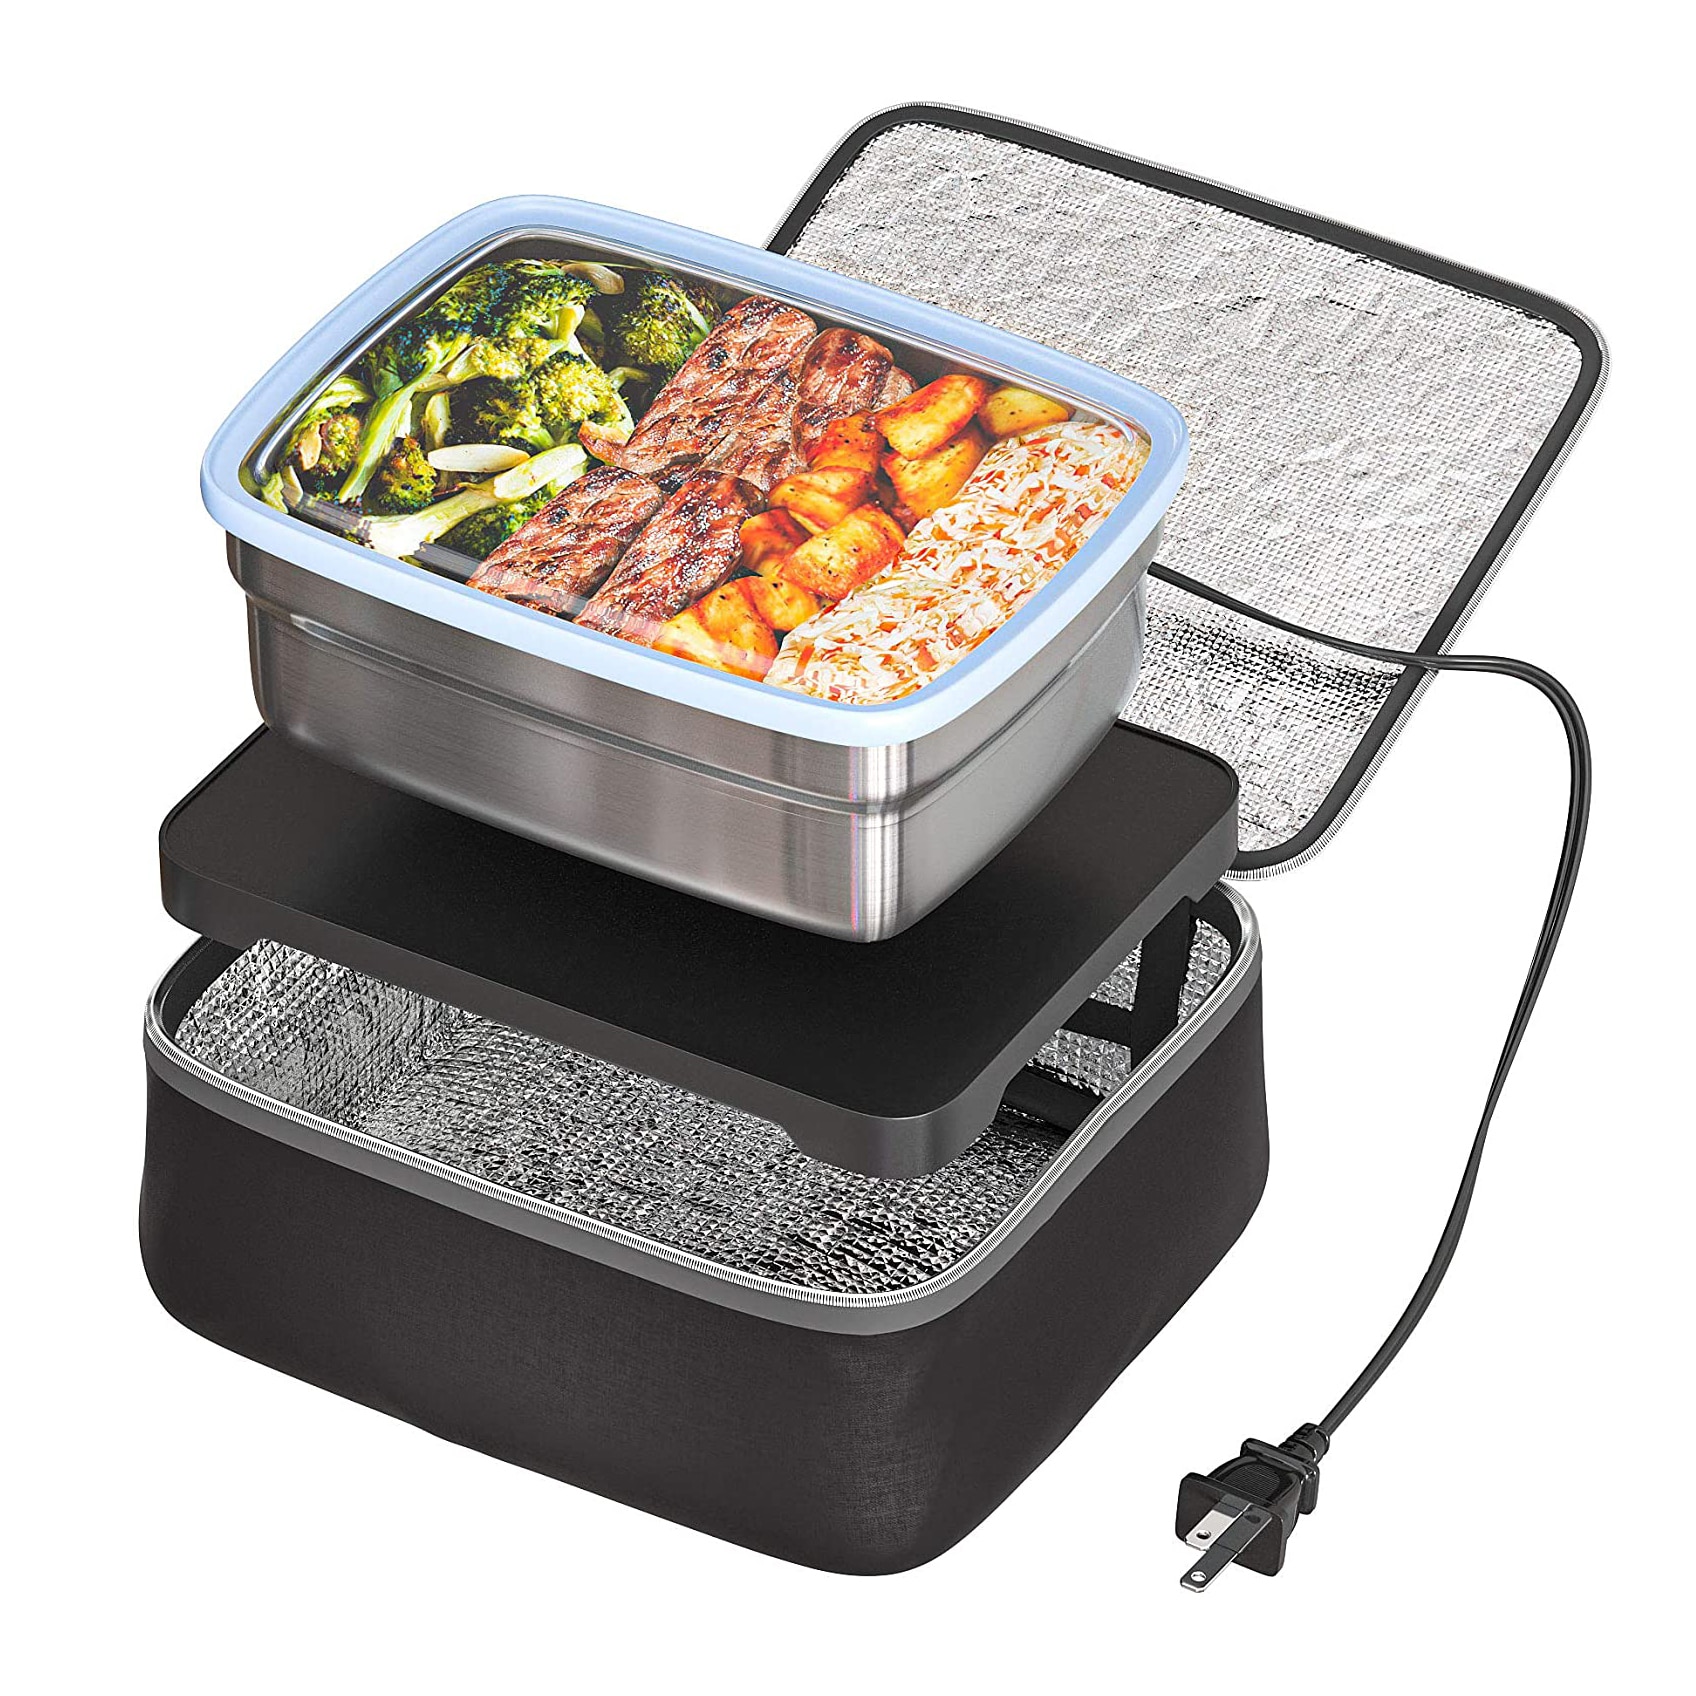 Top 10 Best Portable Food Warmers in 2022 Reviews | Guide